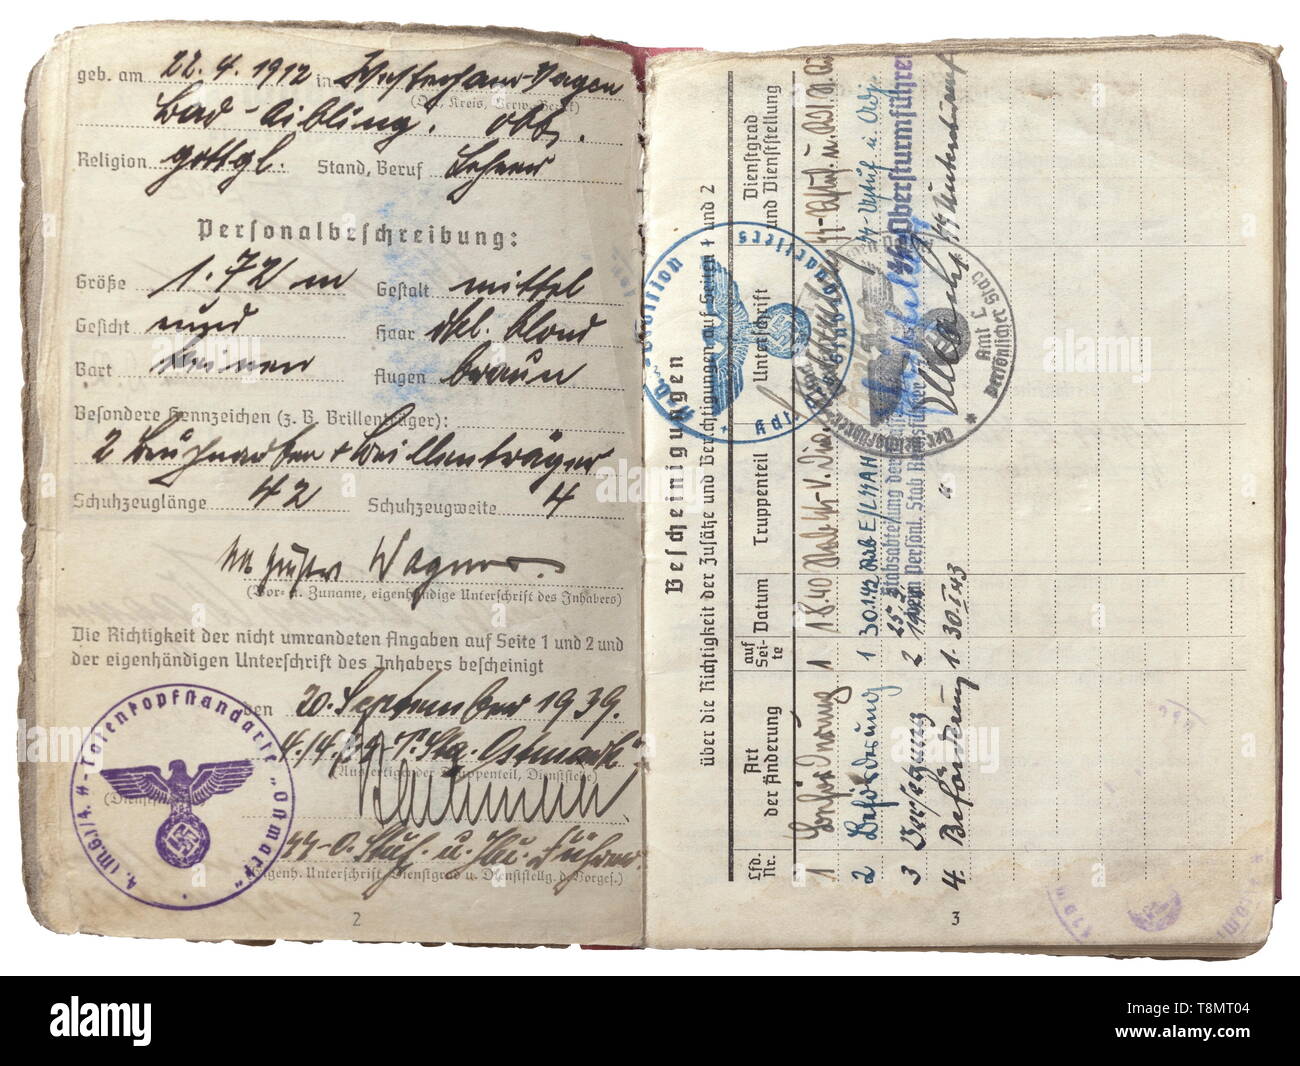 A Soldbuch, identity disc, and photo of Unterscharführer Kurt-Gustav Wagner - on the personal staff of Reichsführer-SS Heinrich Himmler The Soldbuch (paybook) with photo id, issued on 20 September 1939 while assigned to '4. (M.G.)/4.SS-Totenkopfstandarte Ostmark'. With numerous entries like promotions, transfers (personal staff of the Reichsführer, Steinhöring 'Lebensborn'), units, equipment issues, vaccinations, hospital stays, furloughs and more. Included is his identity disc (broken) with designation 'SS-Verfügungstruppe - DIV. 2302' and a photo as an Unterscharführer. H, Editorial-Use-Only Stock Photo